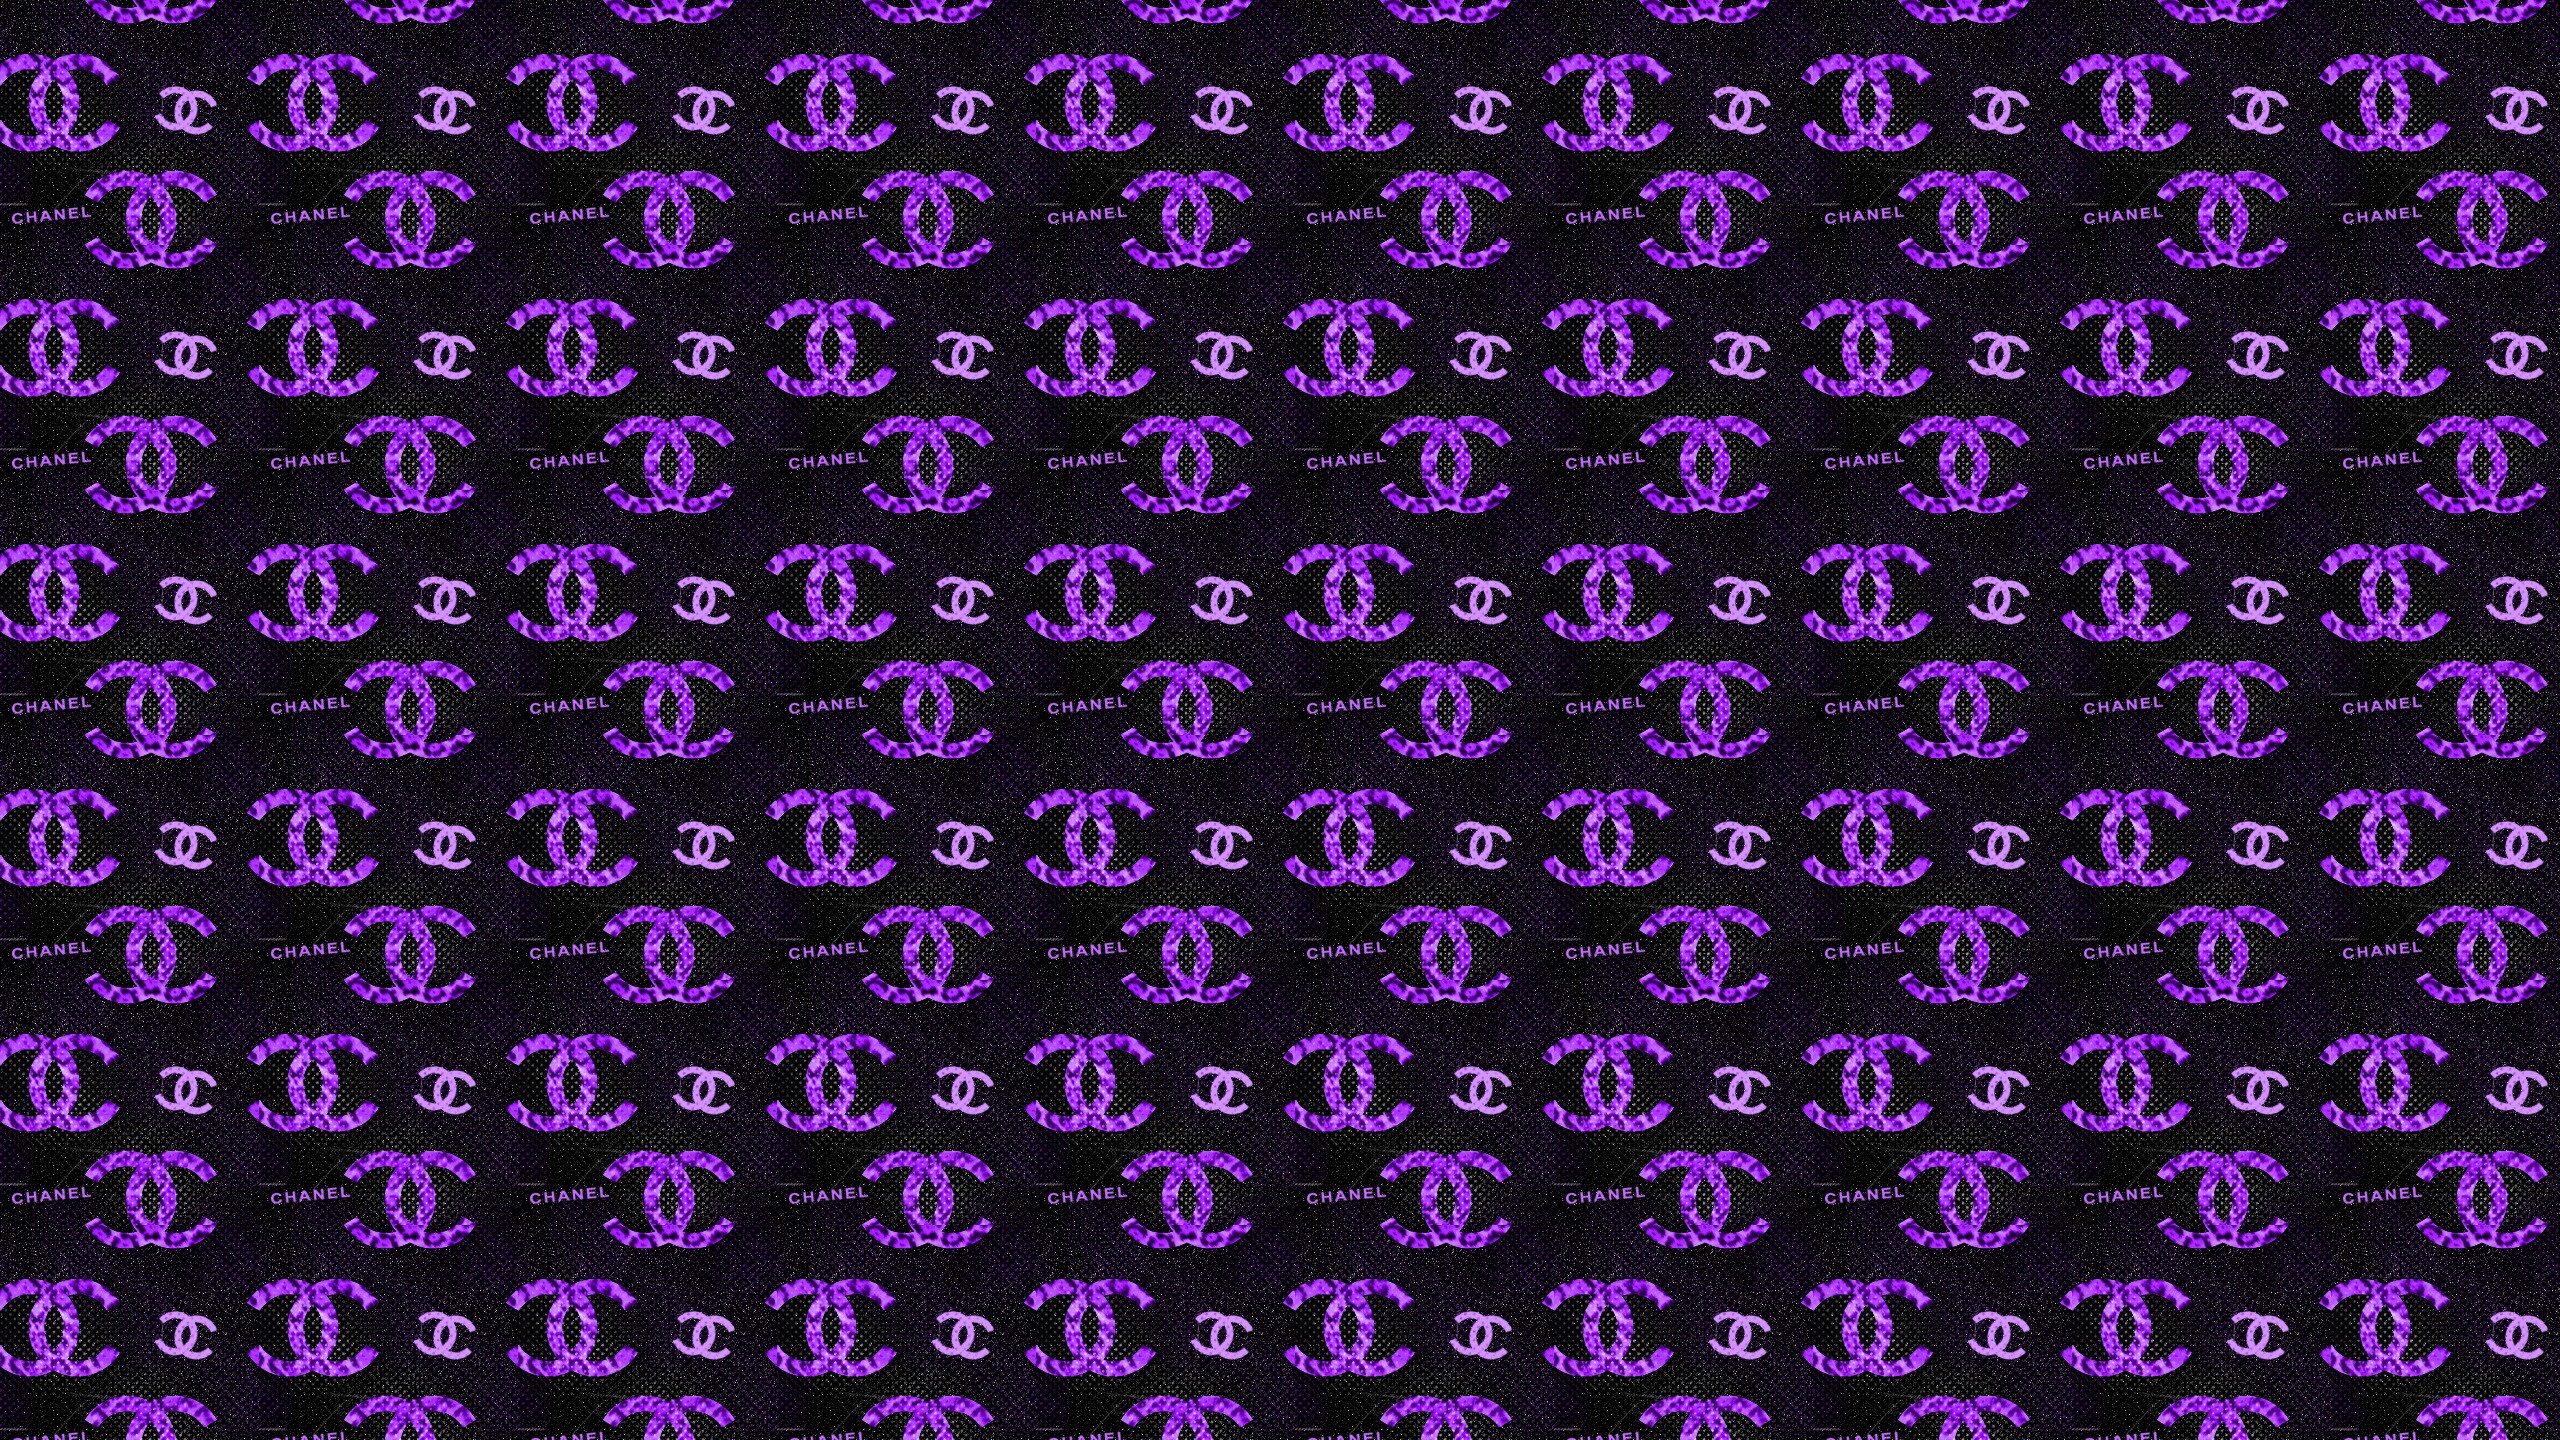 Chanel: A private company and a world leader in creating, developing, manufacturing, and distributing luxury products. 2560x1440 HD Background.